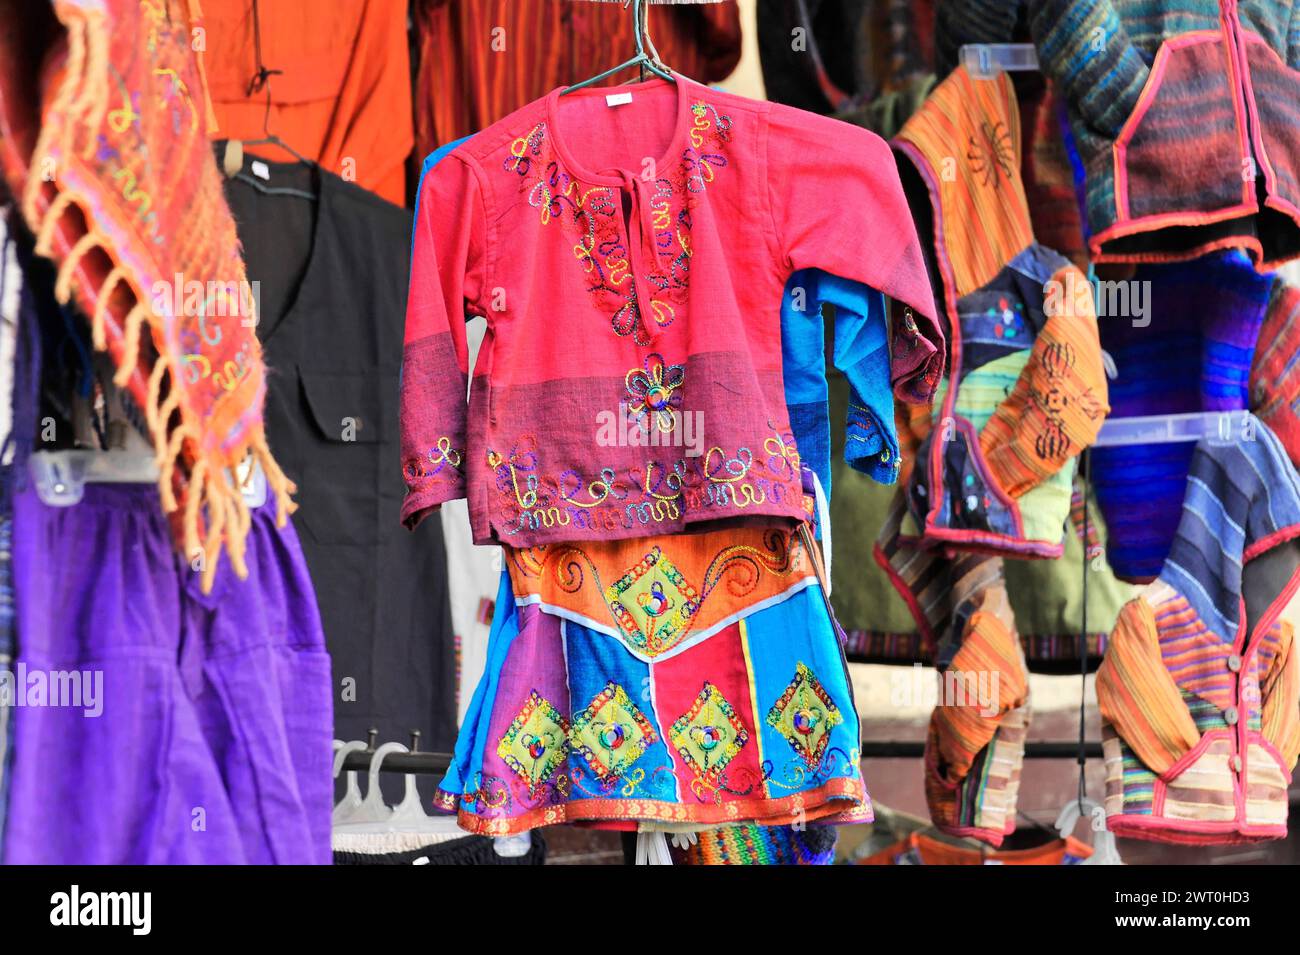 Colourful traditional clothing with embroidery at a market stall, Impressions of Nepal, Kathmandu Nepal Stock Photo